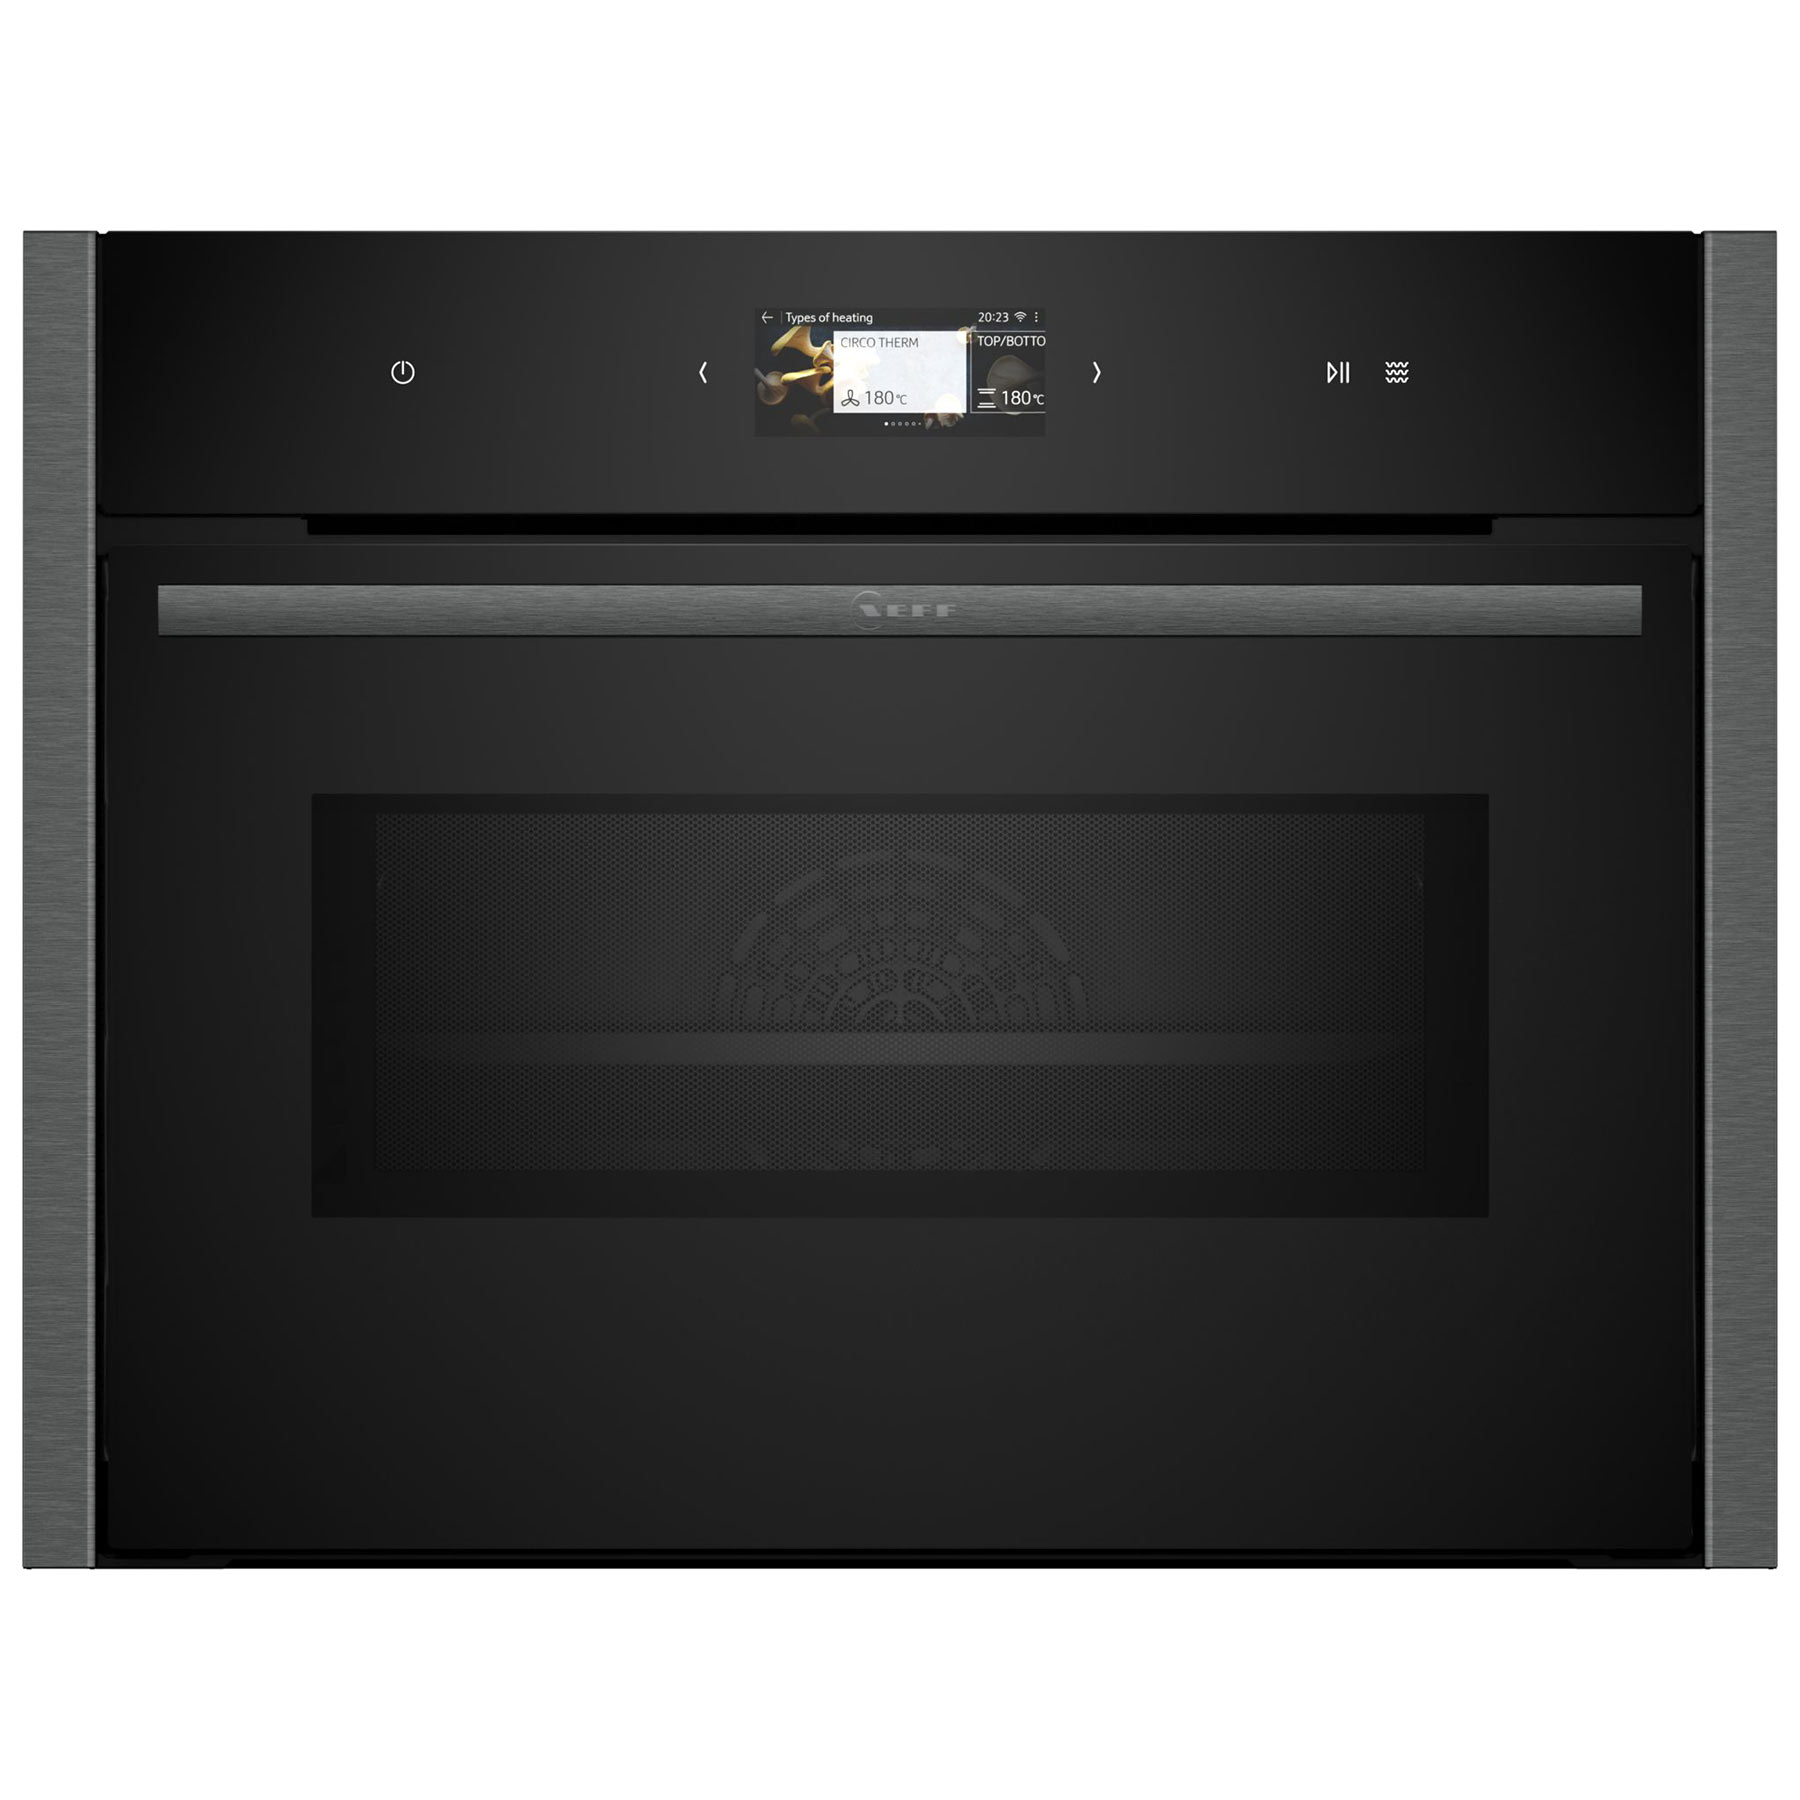 Image of Neff C24MS31G0B N90 Built In Compact Oven Microwave in Black 45L